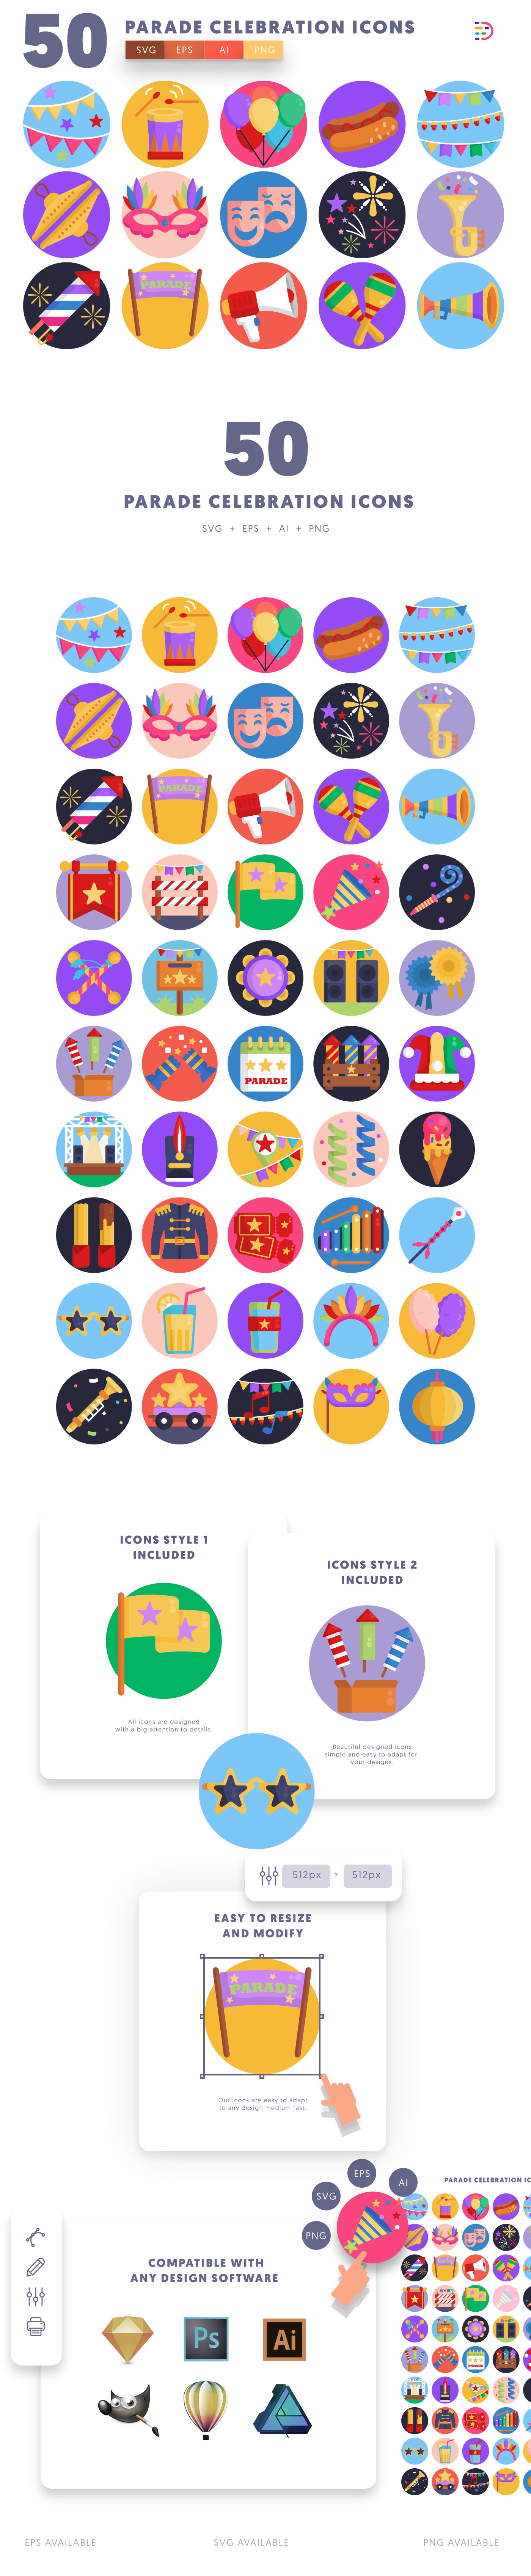 Editable parade celebration icon pack, easy to edit and customize icons